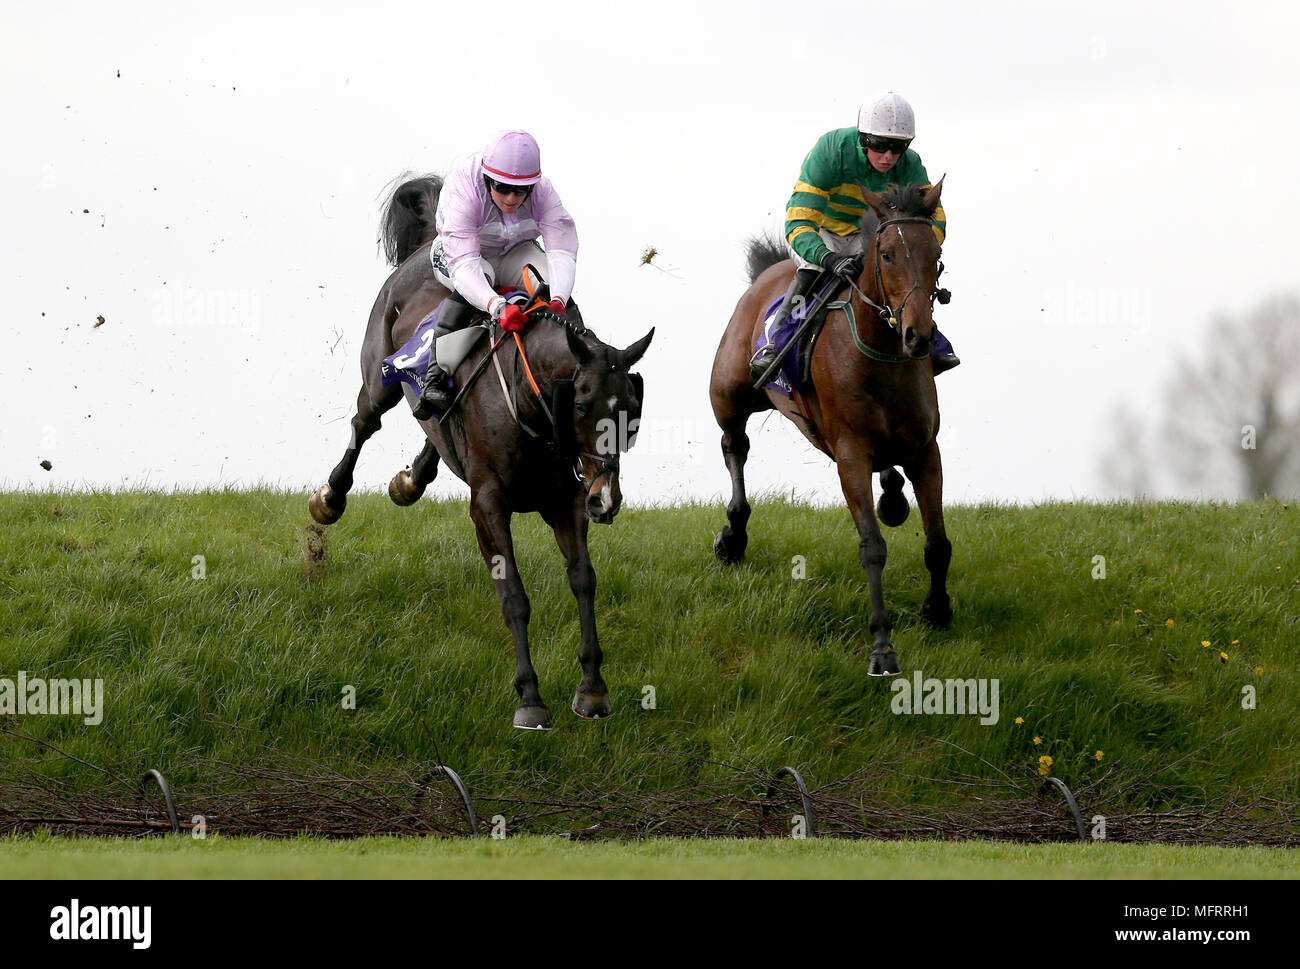 Auvergnat (right) ridden by Donal McInerney on the way to winning the Friends First Cross Country Chase For The La Touche Cup alongside Bless The Wings (left) ridden by jockey Keith Donoghue during day three of the Punchestown Festival 2018 at Punchestown Racecourse, County Kildare. Stock Photo